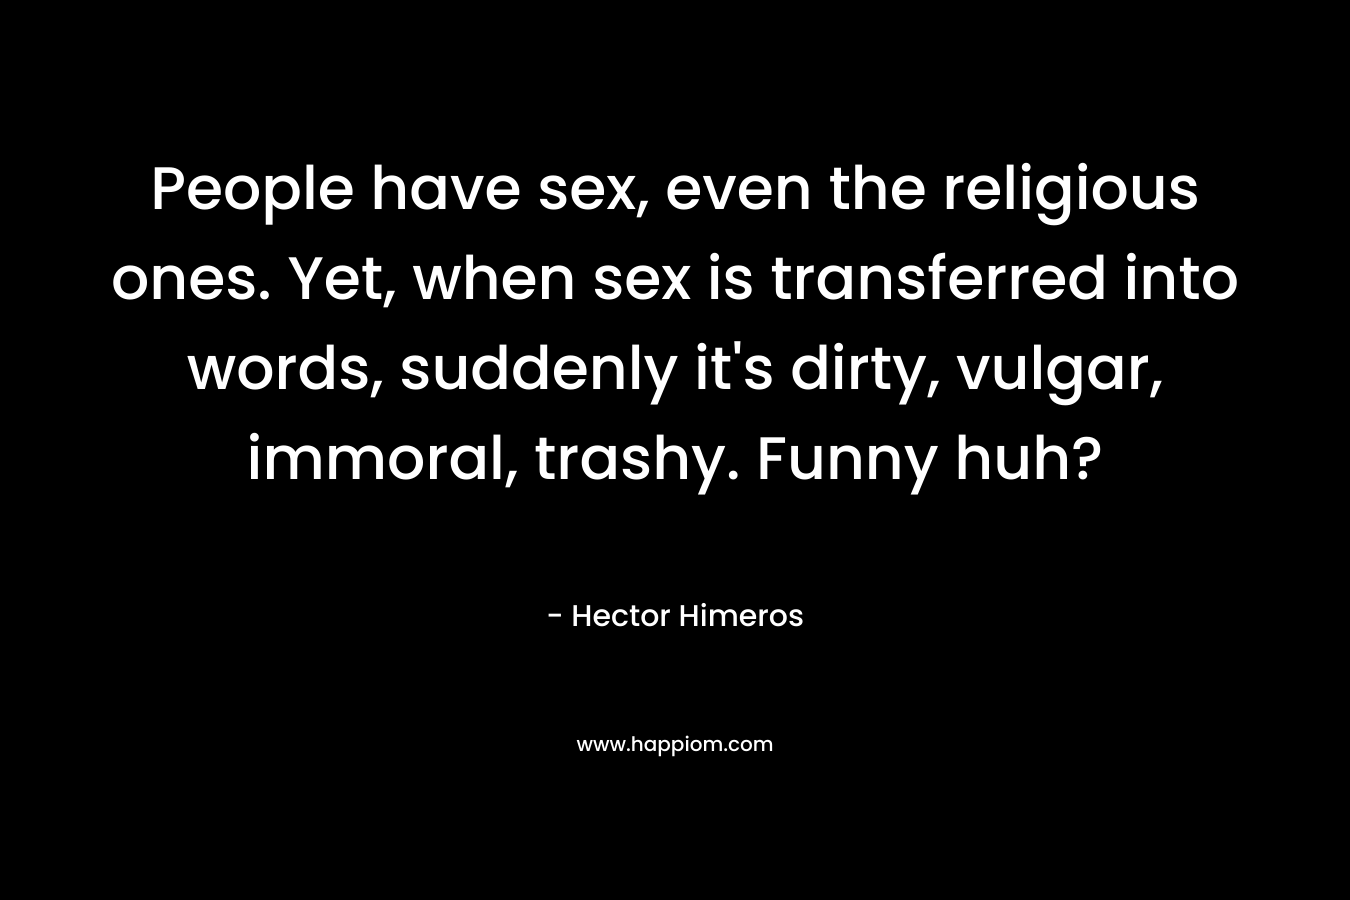 People have sex, even the religious ones. Yet, when sex is transferred into words, suddenly it’s dirty, vulgar, immoral, trashy. Funny huh? – Hector Himeros